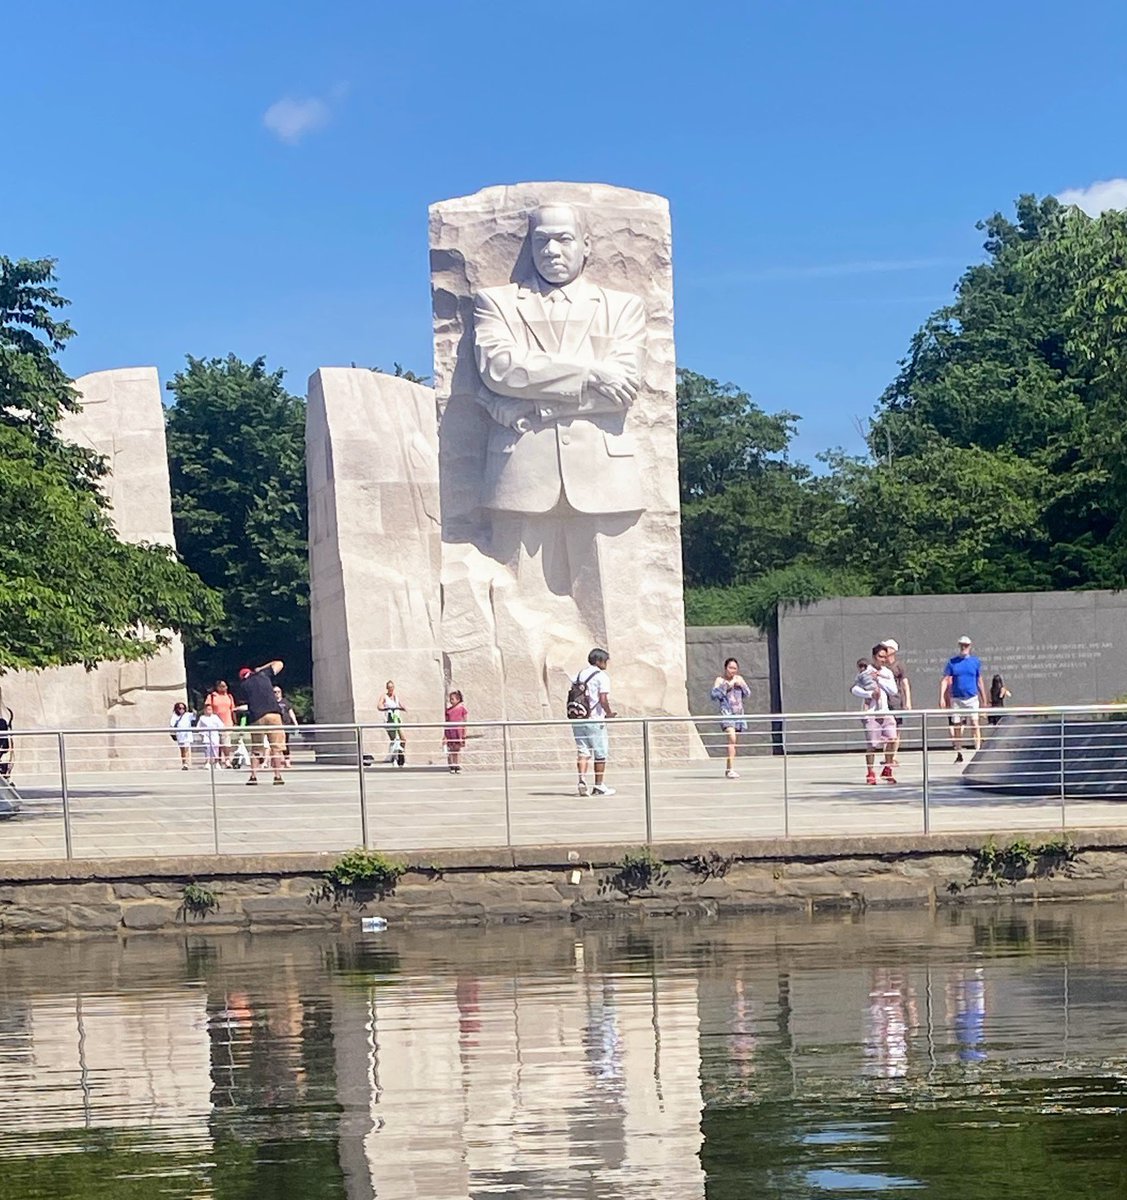 'Out of the mountain of despair, a stone of hope.' From the 'I Have A Dream' speech in Washington, DC on August 28, 1963. #MartinLutherKingDay2024